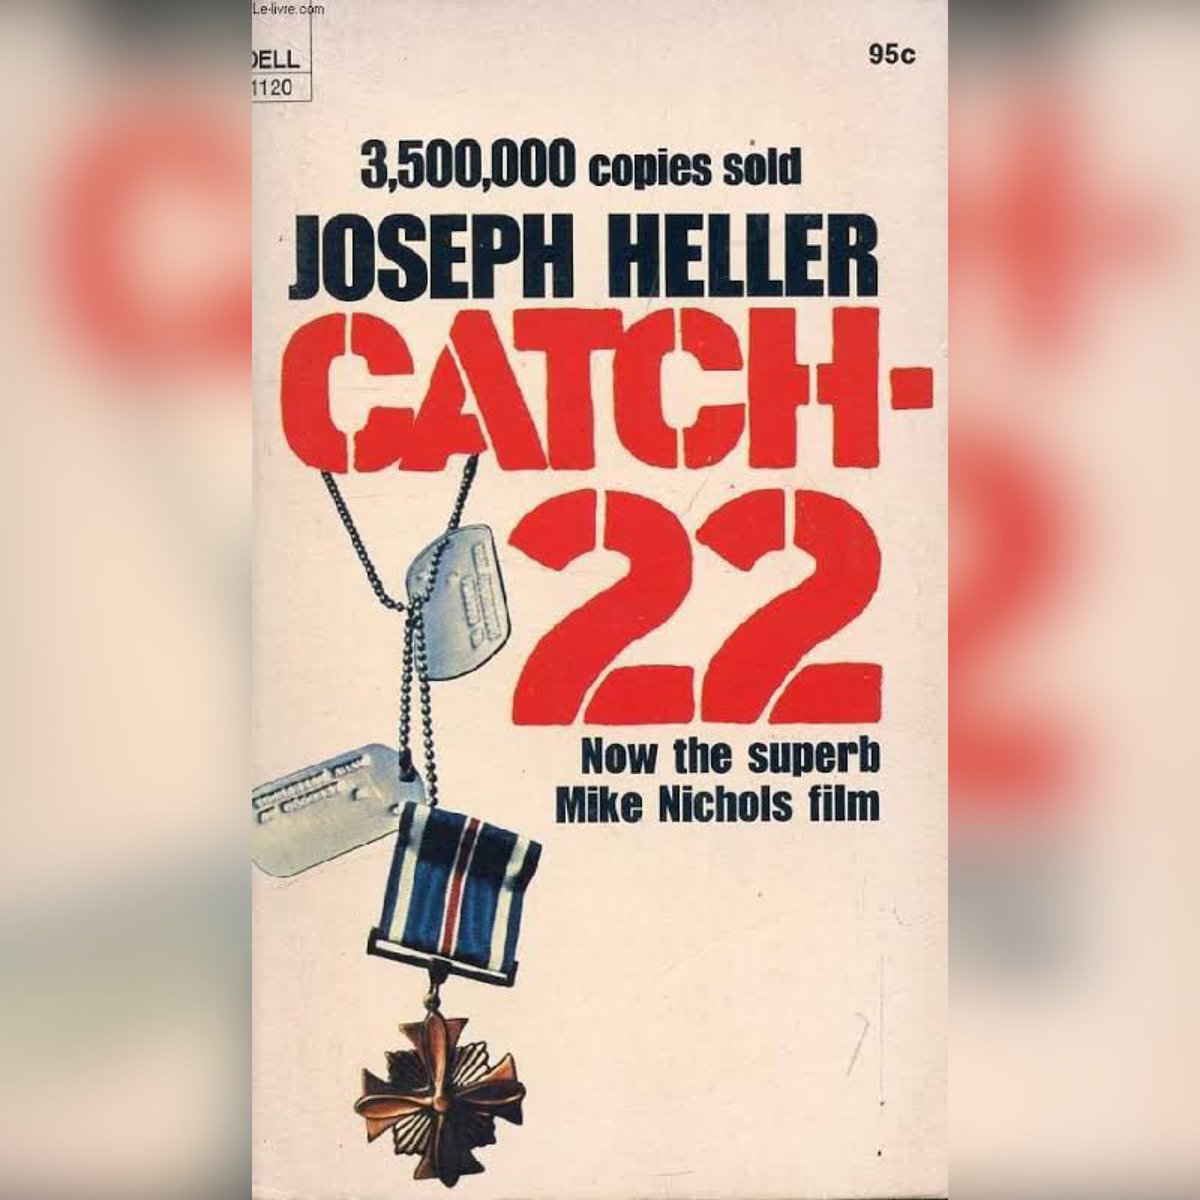 #WWIIMonth begins 2moro with #JosephHeller & #MikeNichols #Catch22 I’m joined by #TonyFarina & @Andy_Review let’s us know your thoughts on the novel, film or even what your favourite piece of fiction set during or inspired by true events of the war is? #PrepareForPrattle